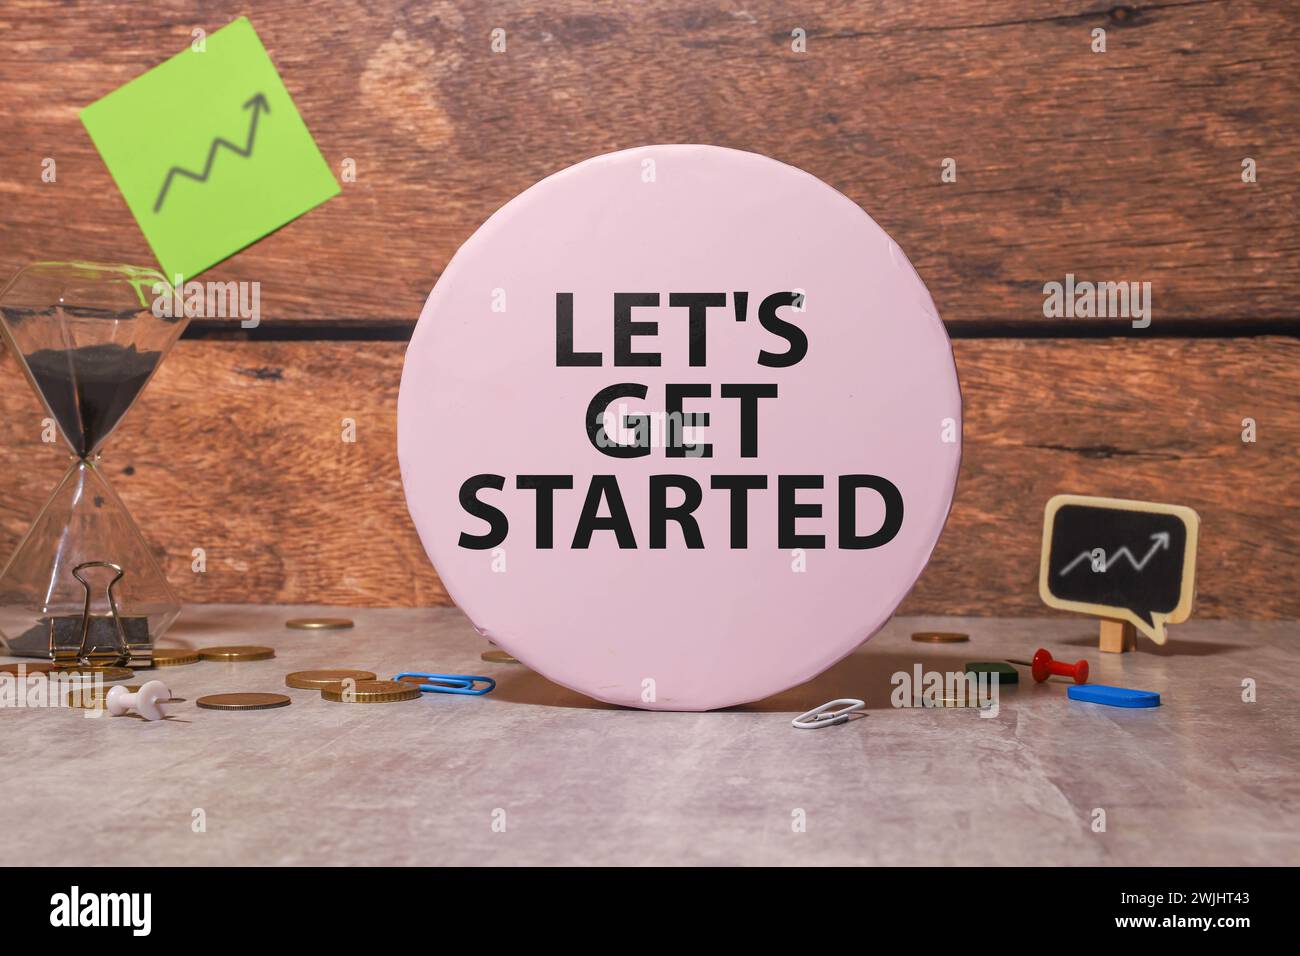 Let's get started is shown using a text. Stock Photo